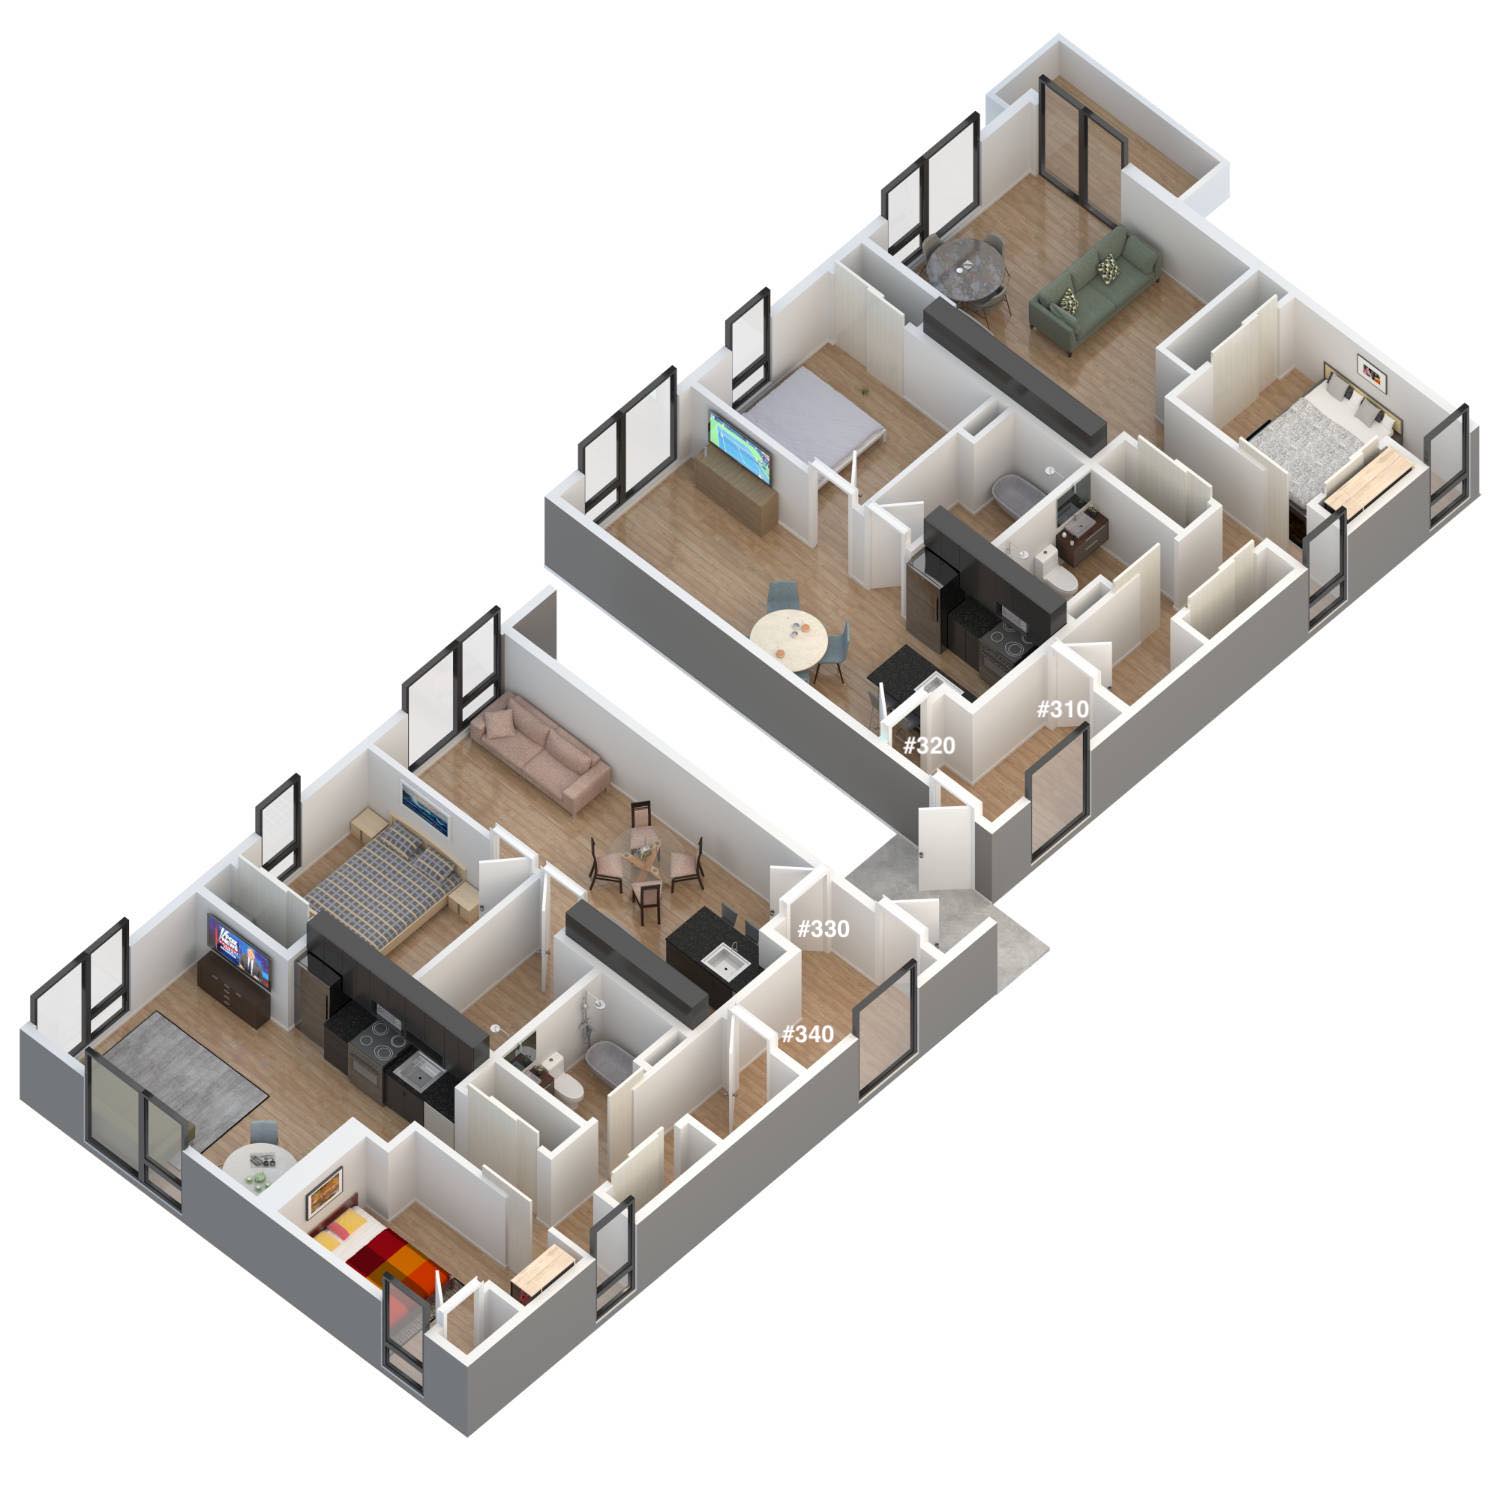 Level 3 - Floor Plan With Apartment Numbers